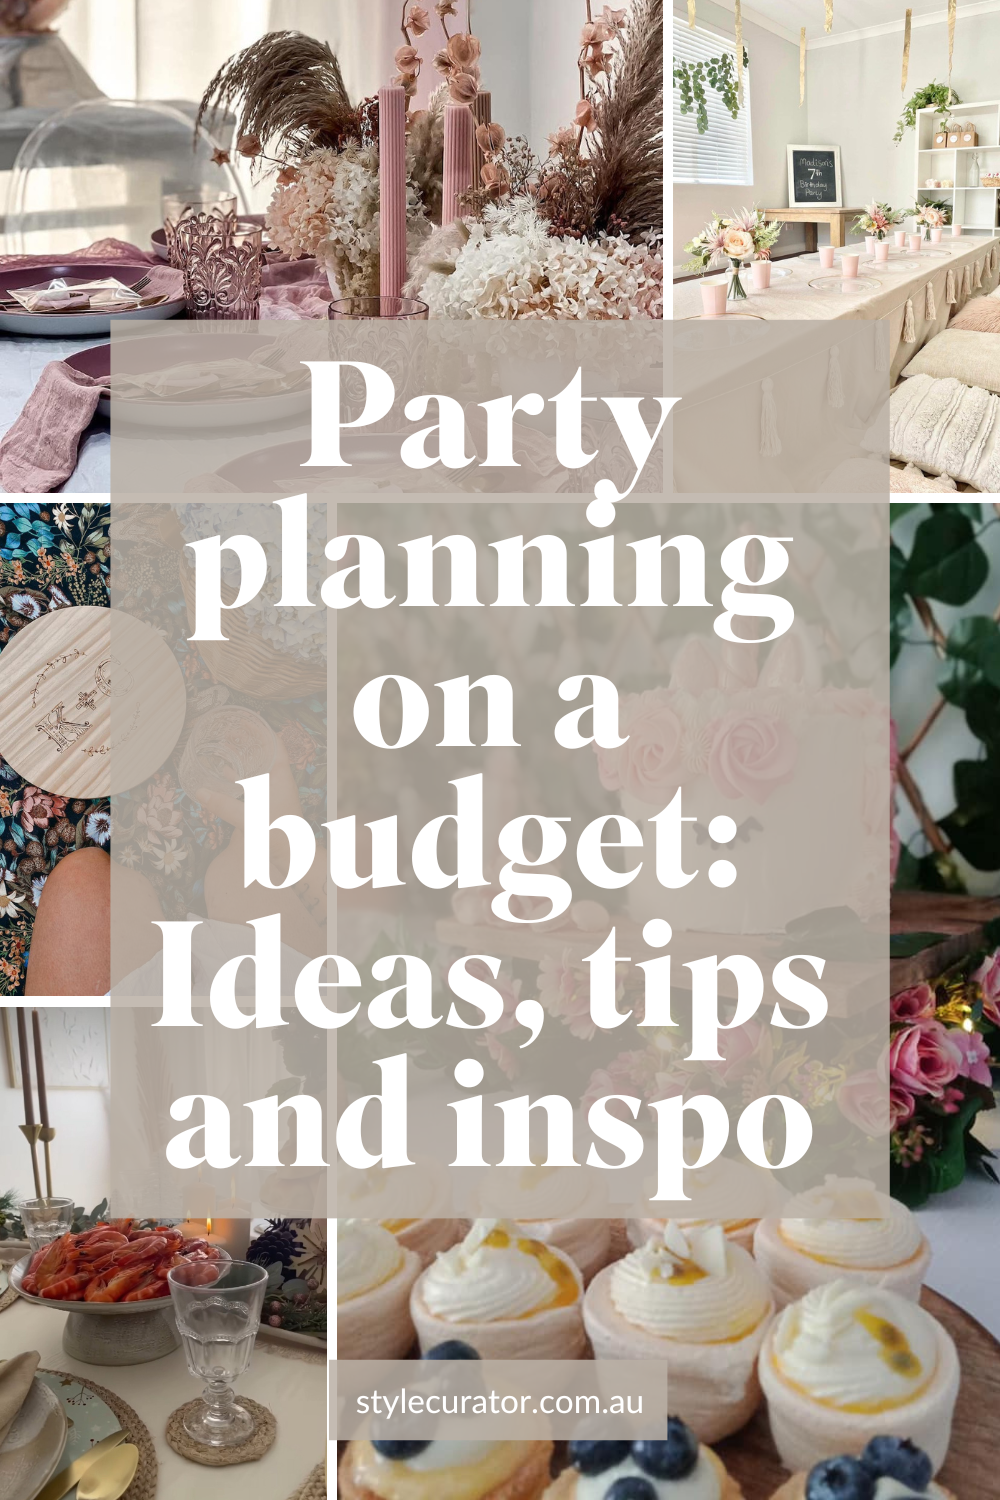 Party planning on a budget: ideas, tips and inspo